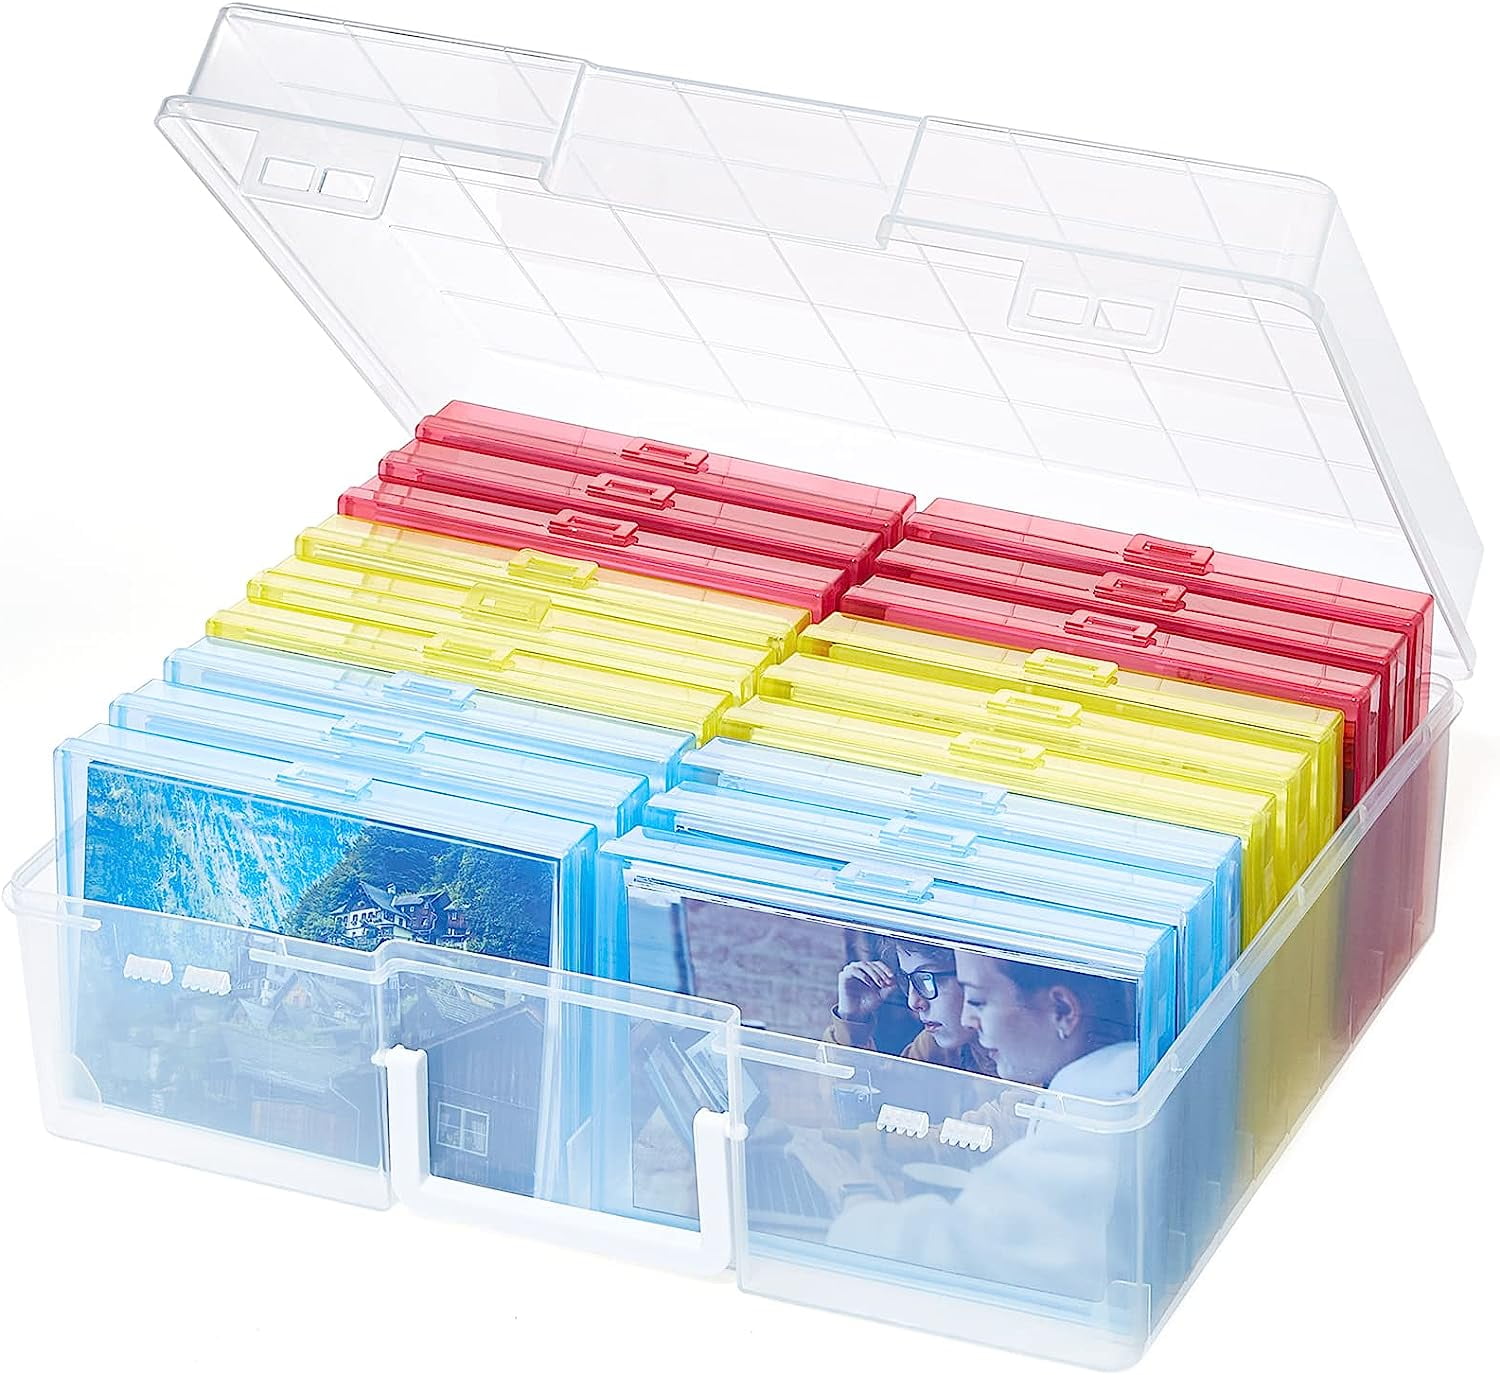 16 Transparent 4x6 Photo Storage Boxes and Organizer with Handle for  Pictures, Art Supplies (Rainbow Colors)